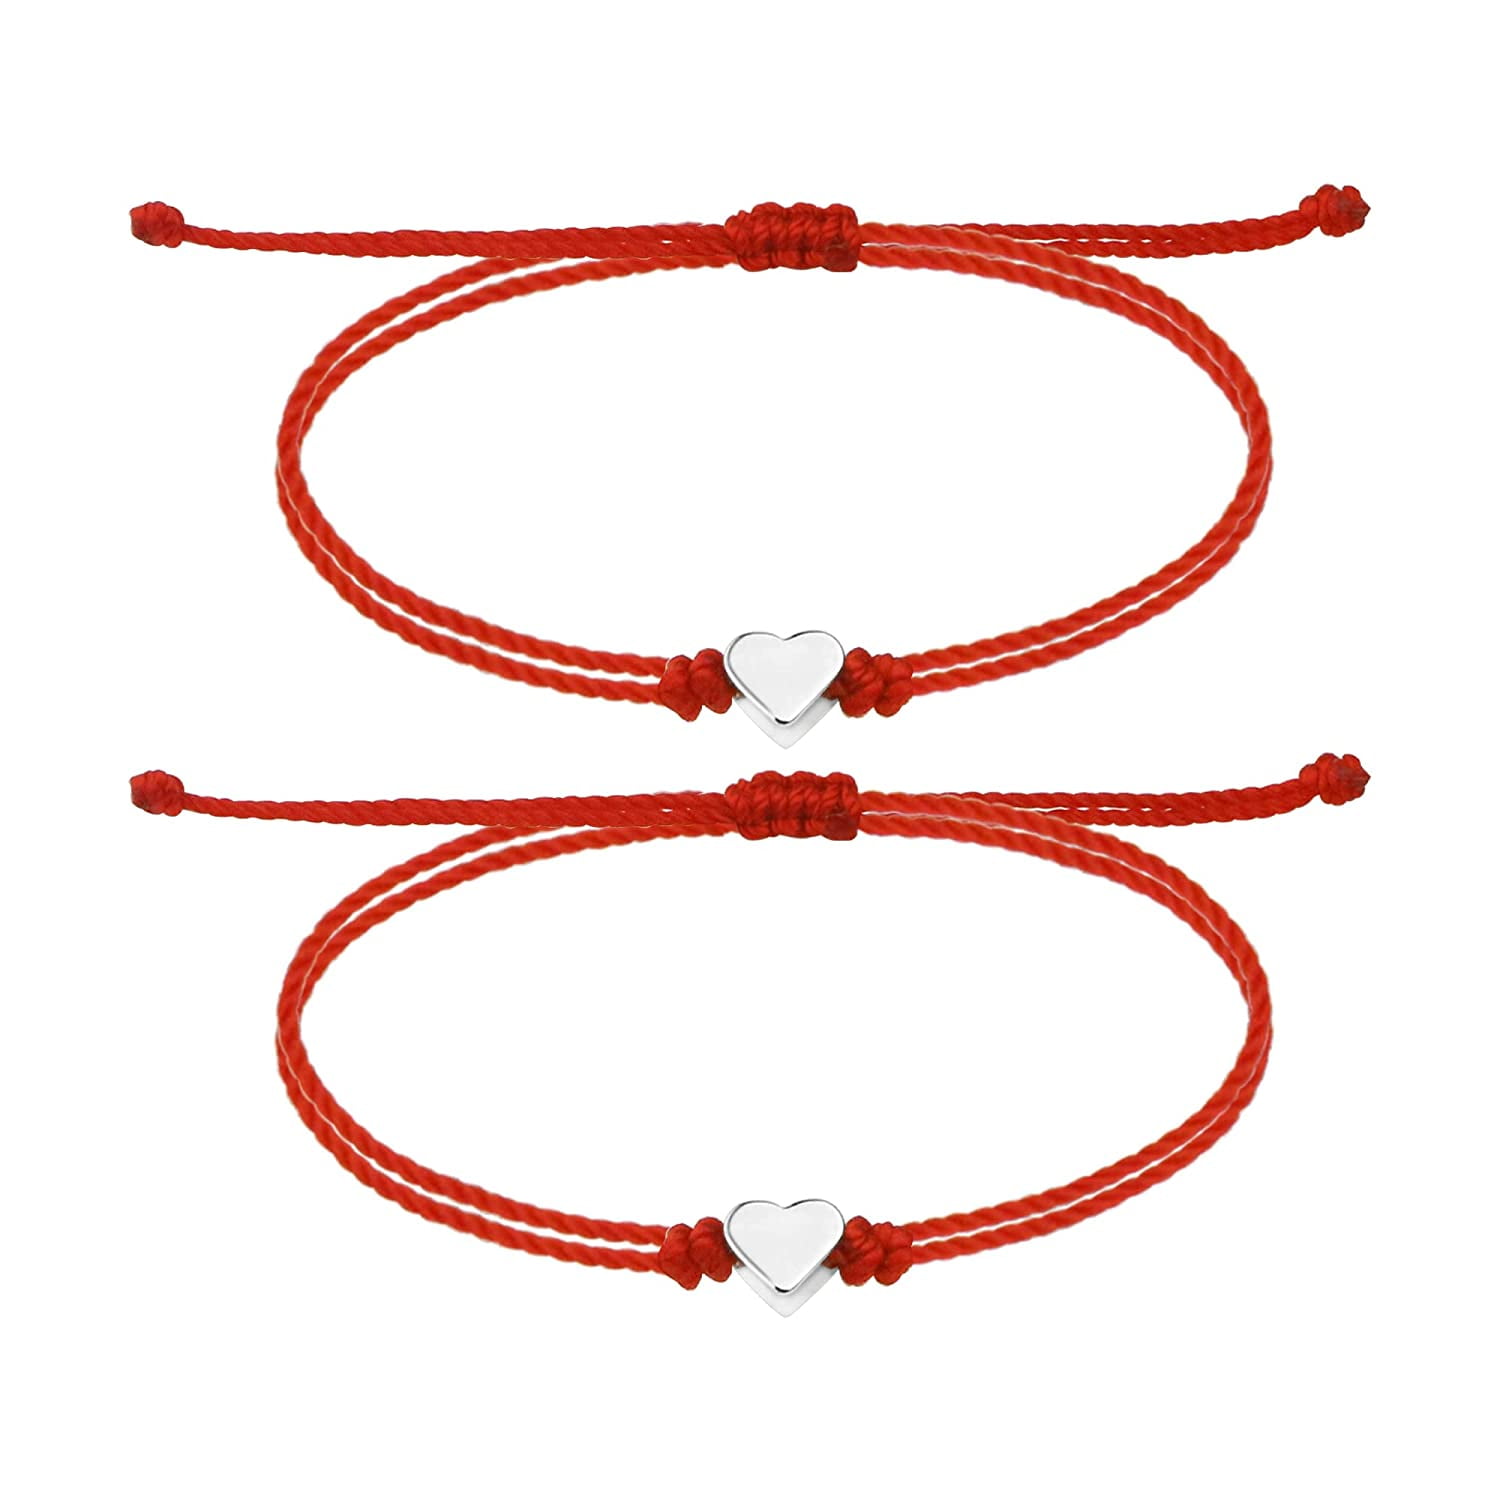 Invisible String | Magnetic Couples Bracelets